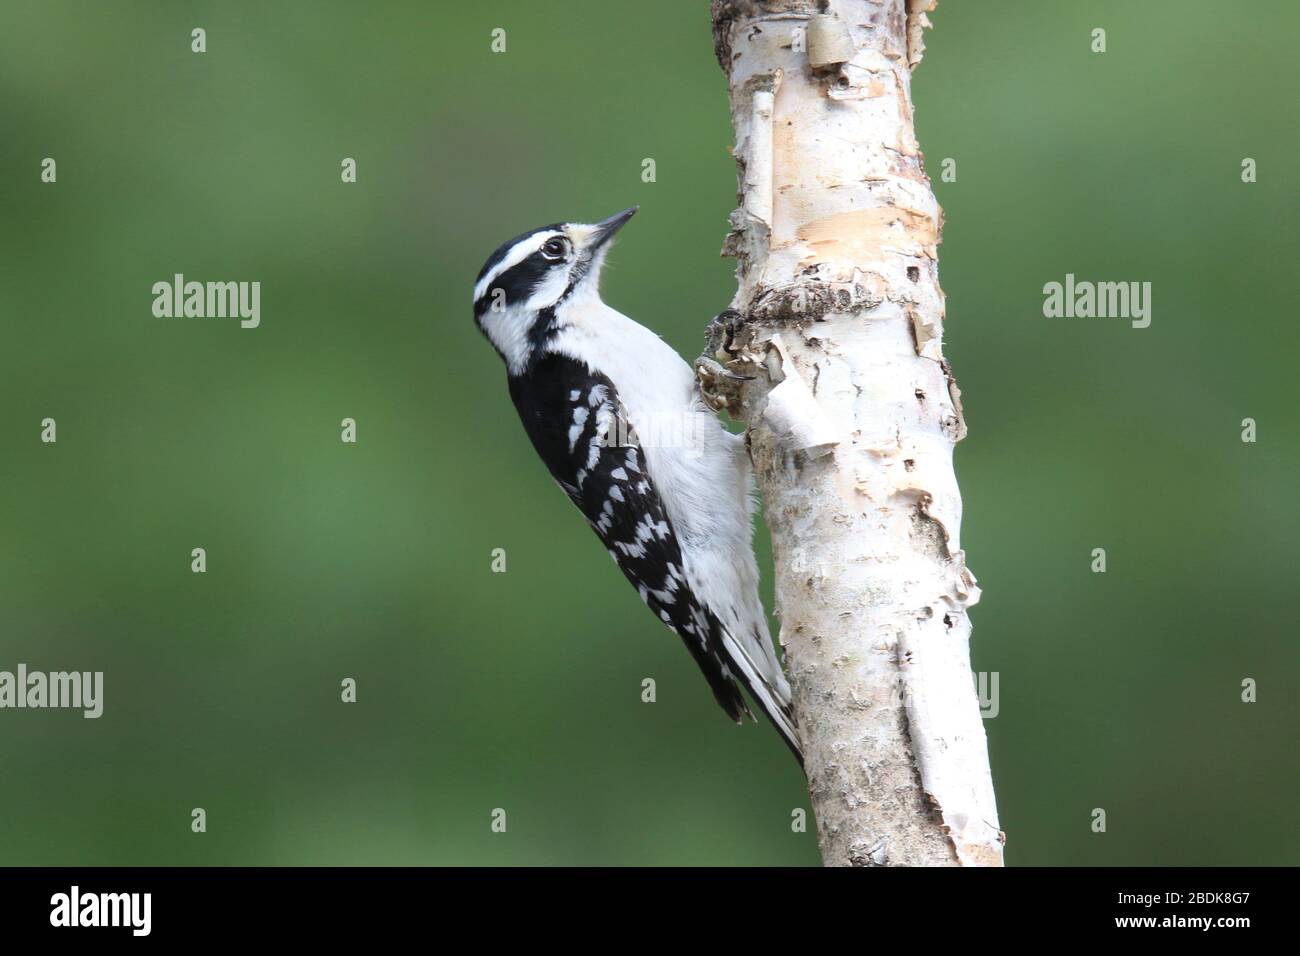 Female Downy woodpecker Picoides pubescens perching on a Birch Branch Stock Photo